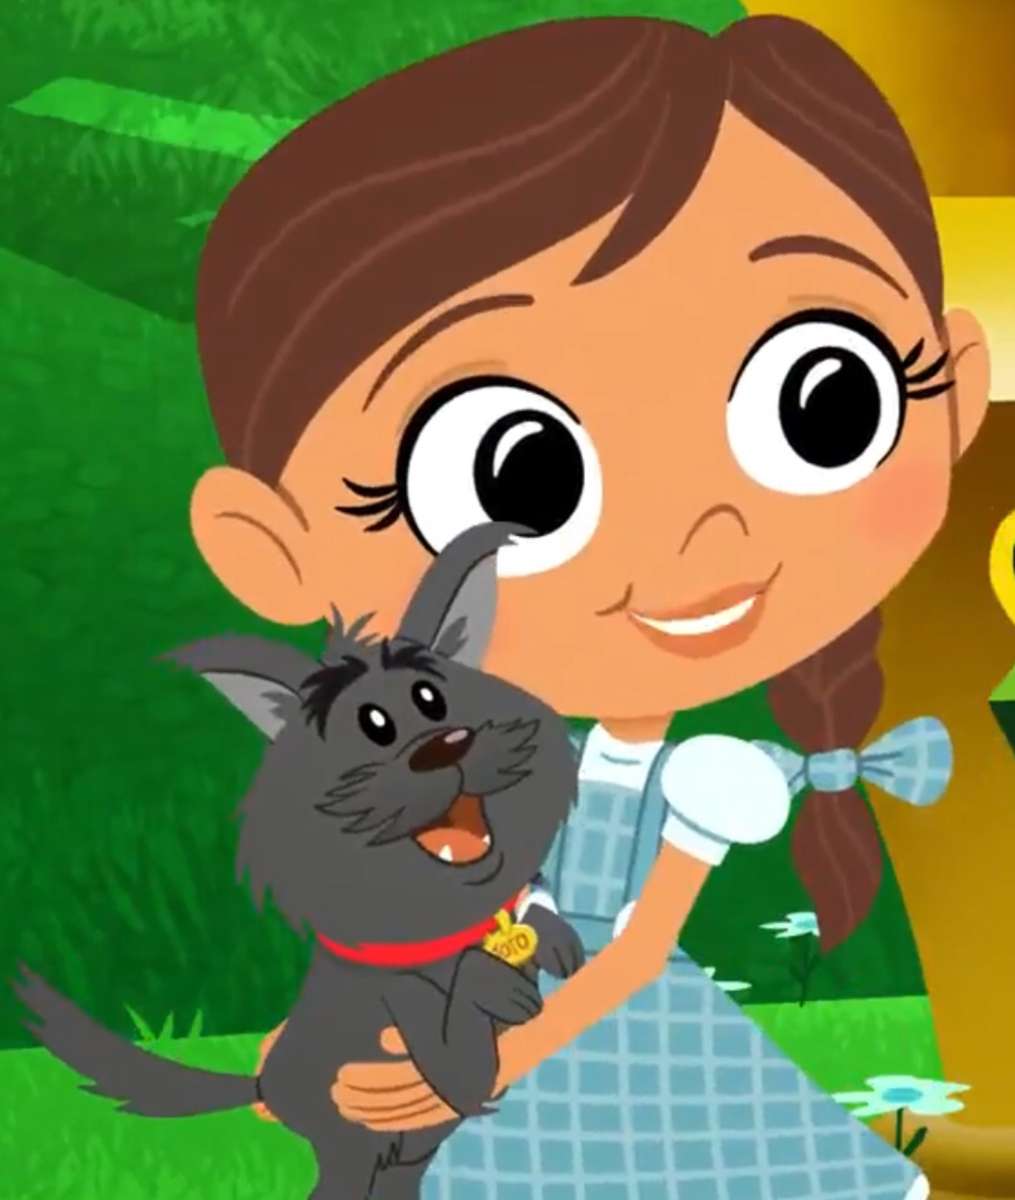 Dorothy Gale e Toto❤️❤️❤️❤️❤️ puzzle online